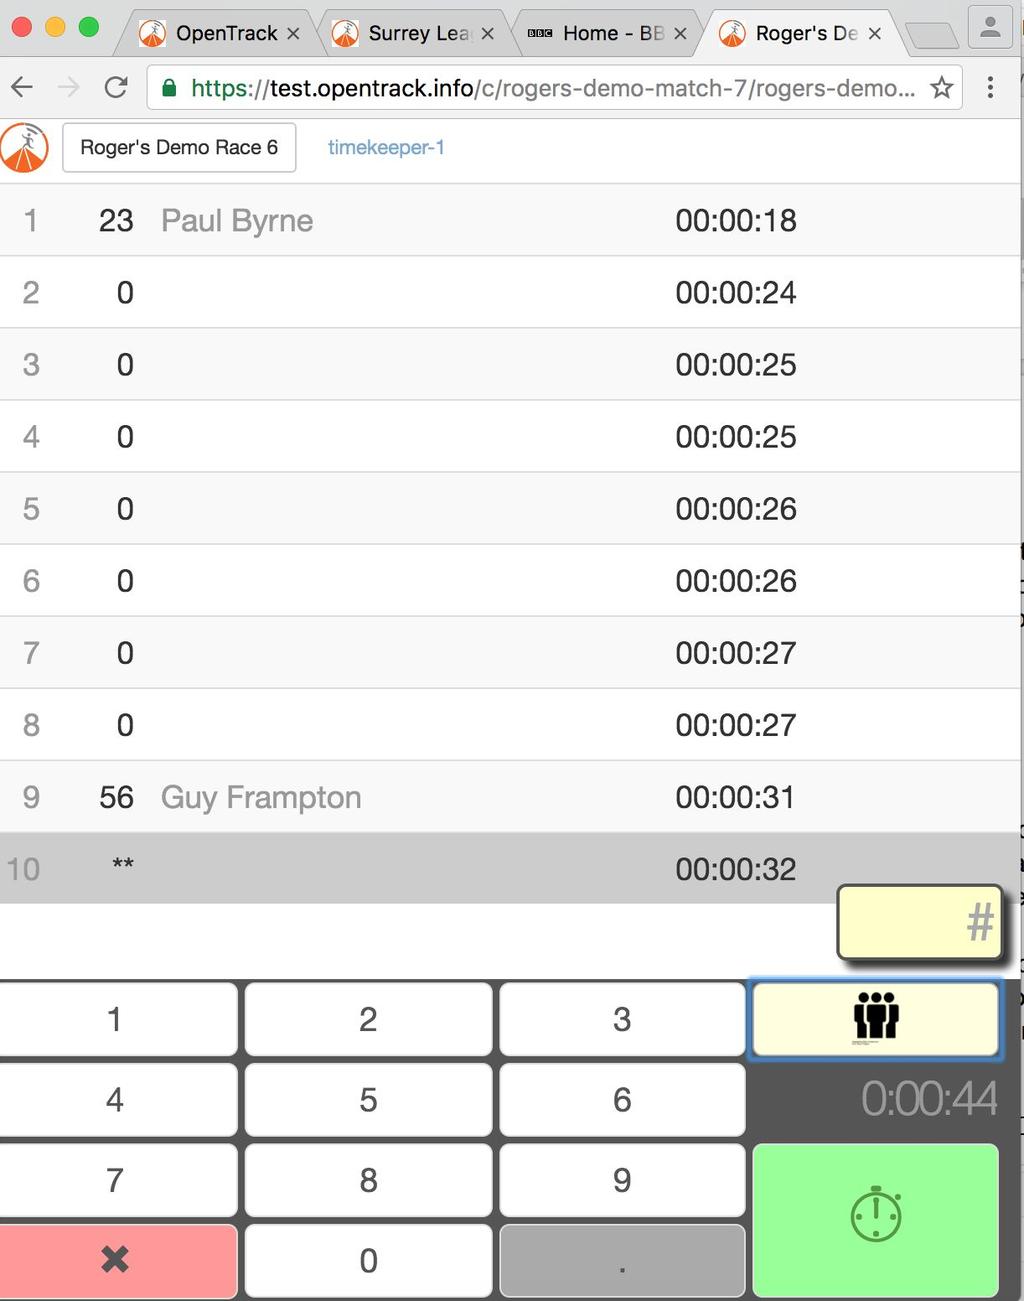 Splits (mid-race positions) Split timings, though not essential for race reporting, do allow connected observers to see what is going on in a race that may well be taking place out of sight.